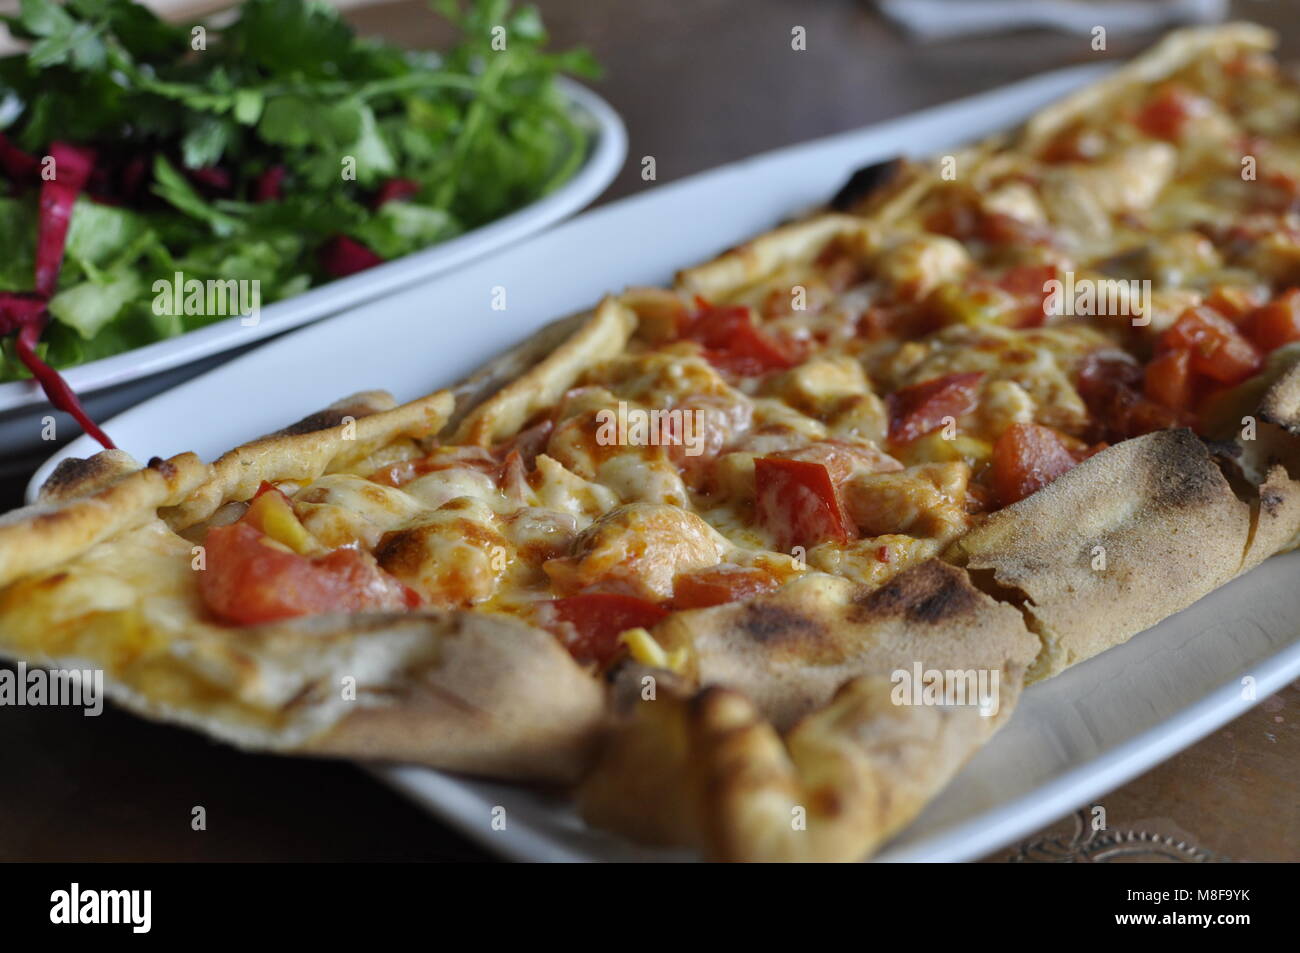 Turkish pizza sitting oven fresh on a plate Stock Photo